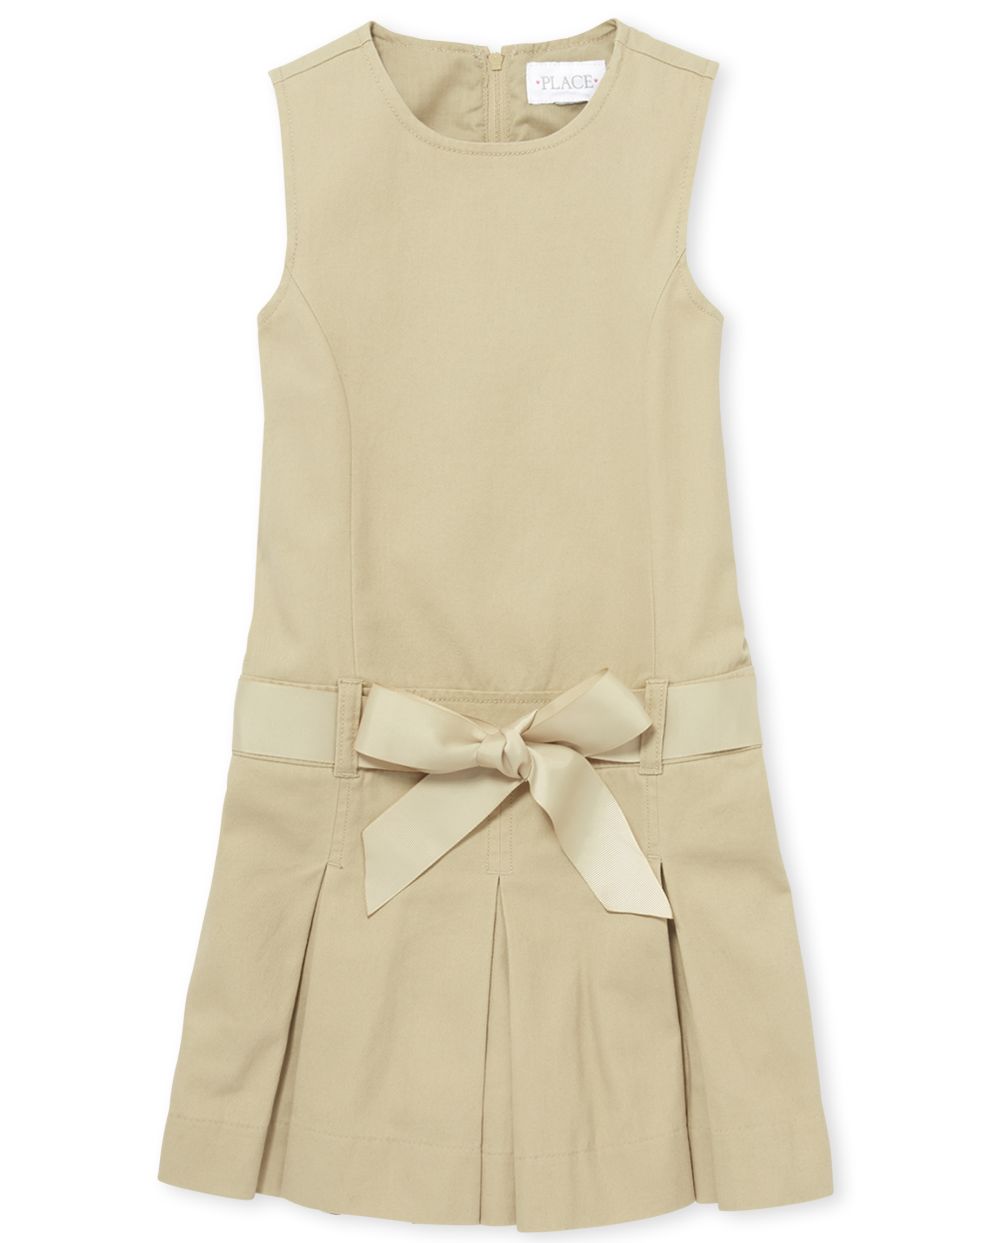 Girls Above the Knee Round Neck Pleated Self Tie Belted Back Zipper Sleeveless Jumper With a Ribbon